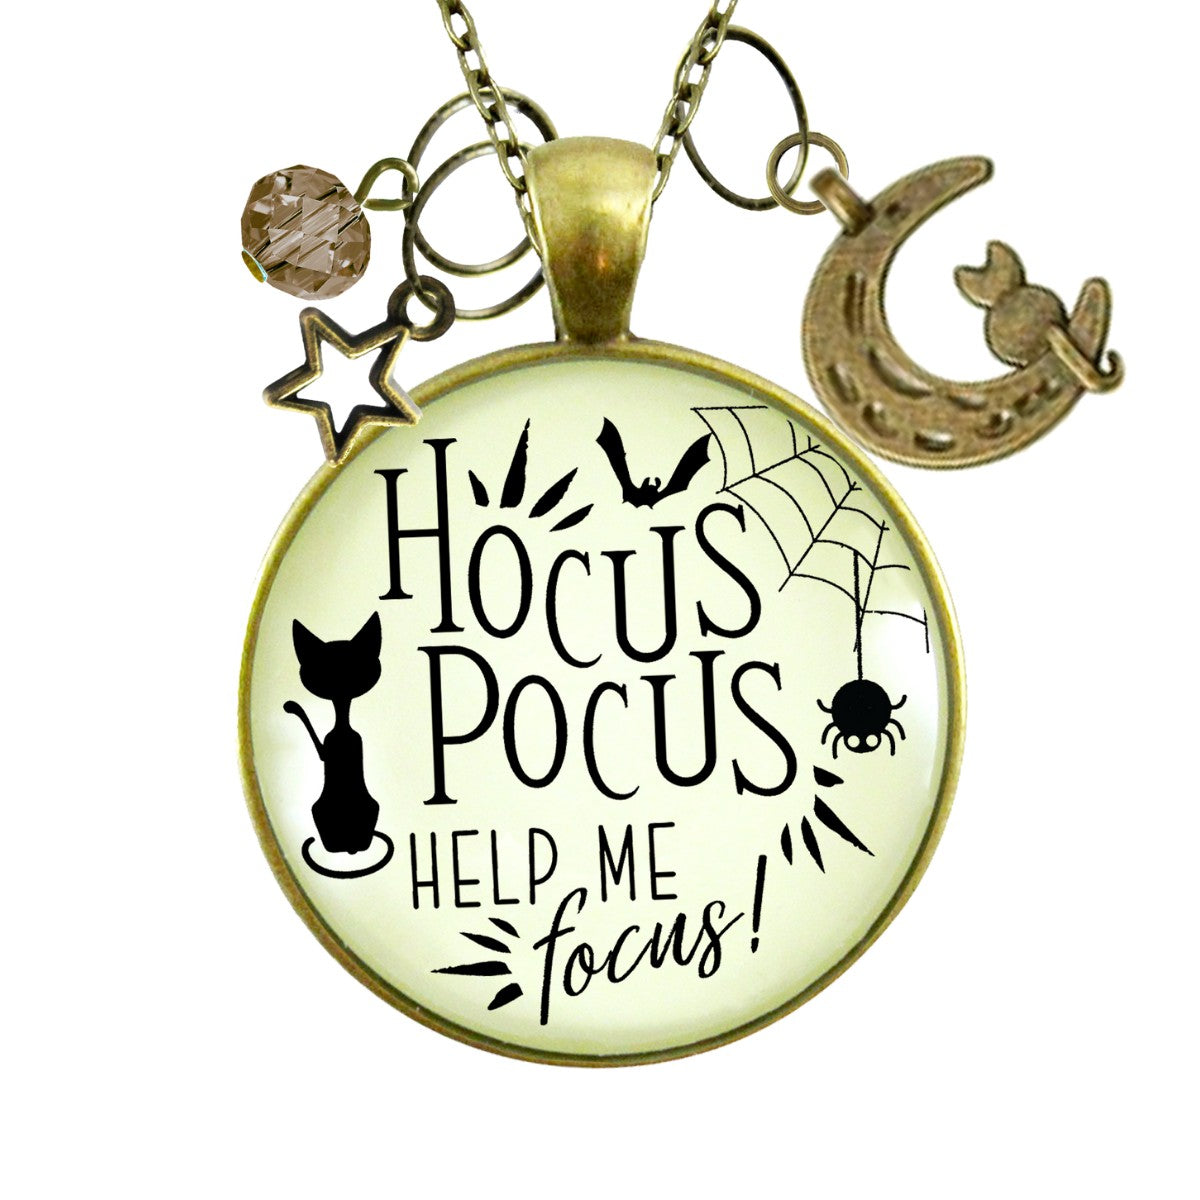 Hocus Pocus Necklace Help Me Focus Funny Halloween Spider Black Cat Jewelry for Women Costume Fashion Book Charm  Necklace - Gutsy Goodness Handmade Jewelry